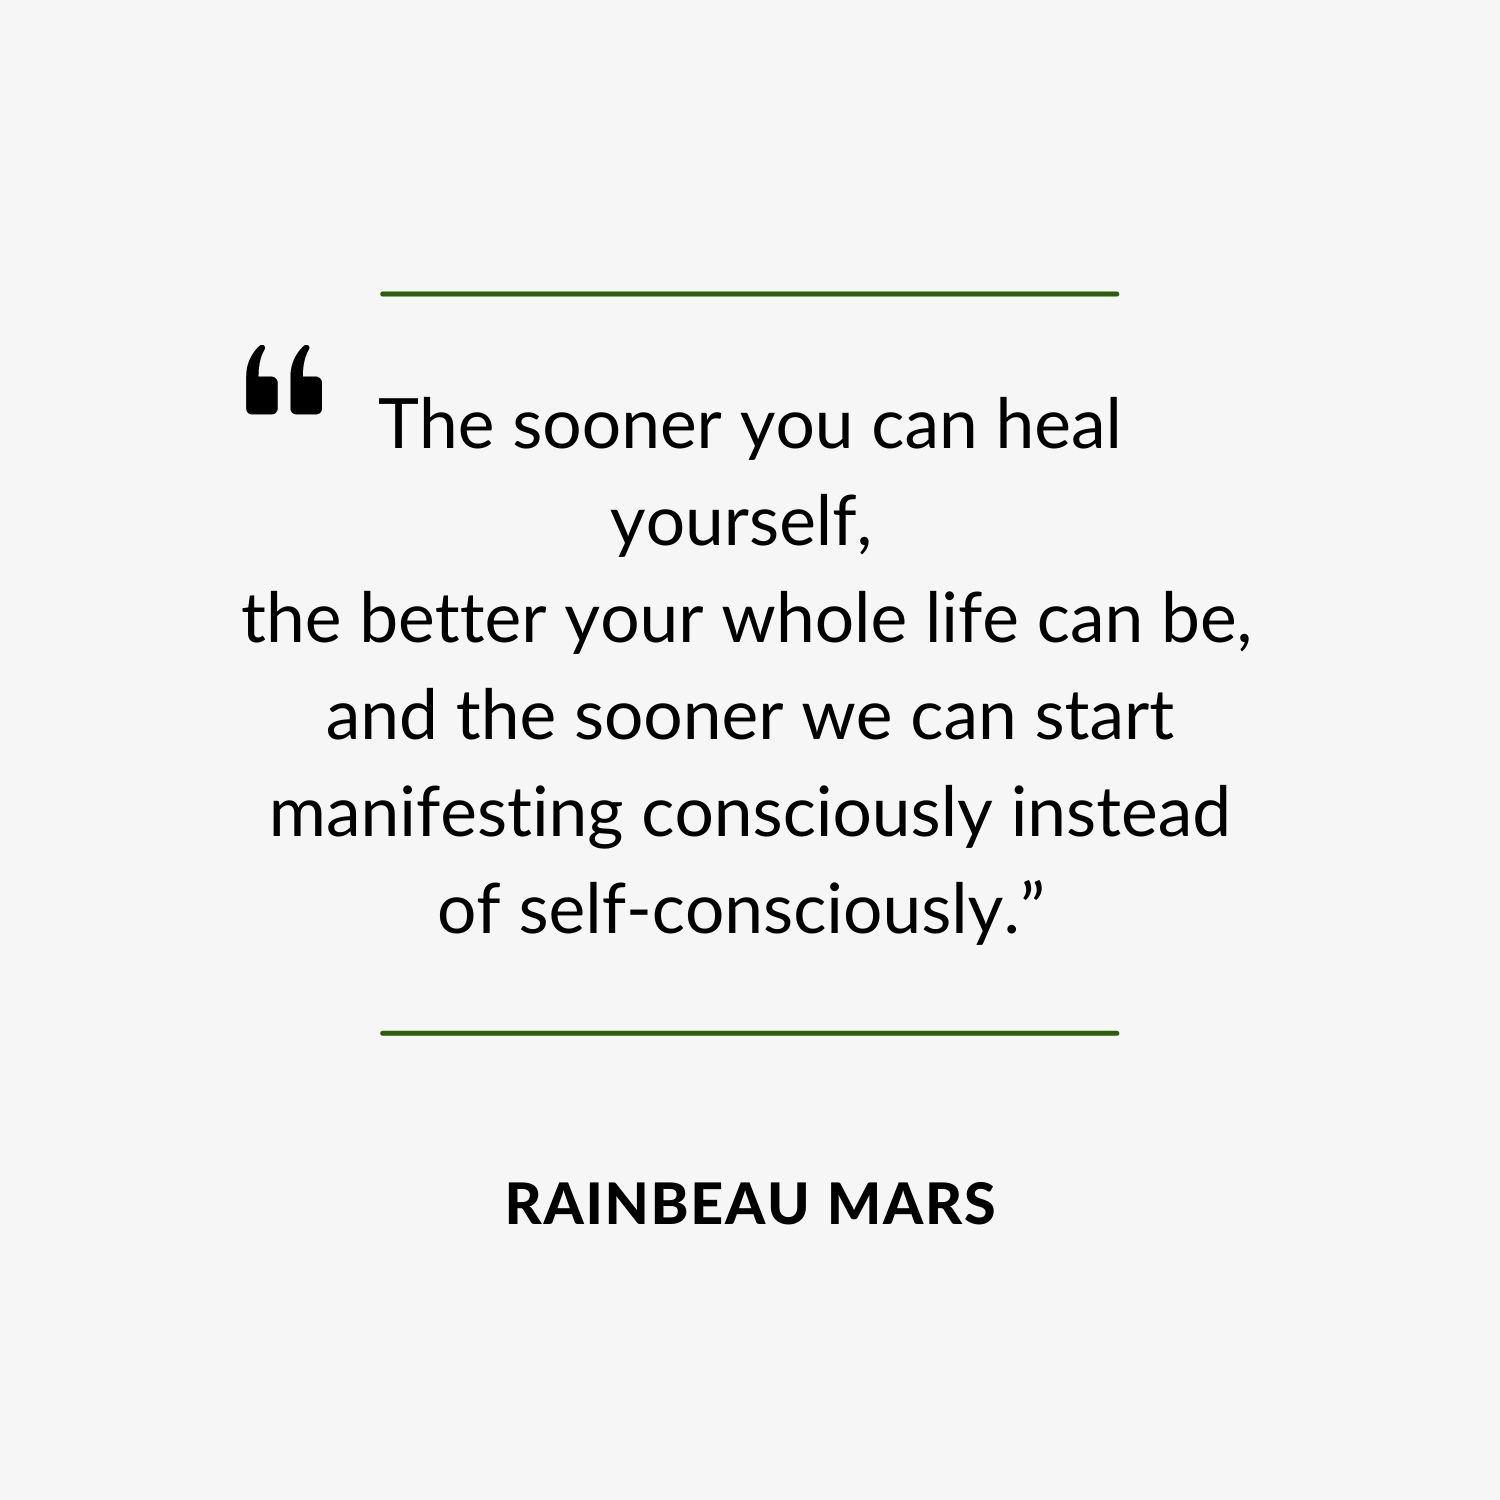 Quote - "The sooner you can heal yourself, the better your whole life can be, and the sooner we can start manifesting consciously instead of self-consciously.” 